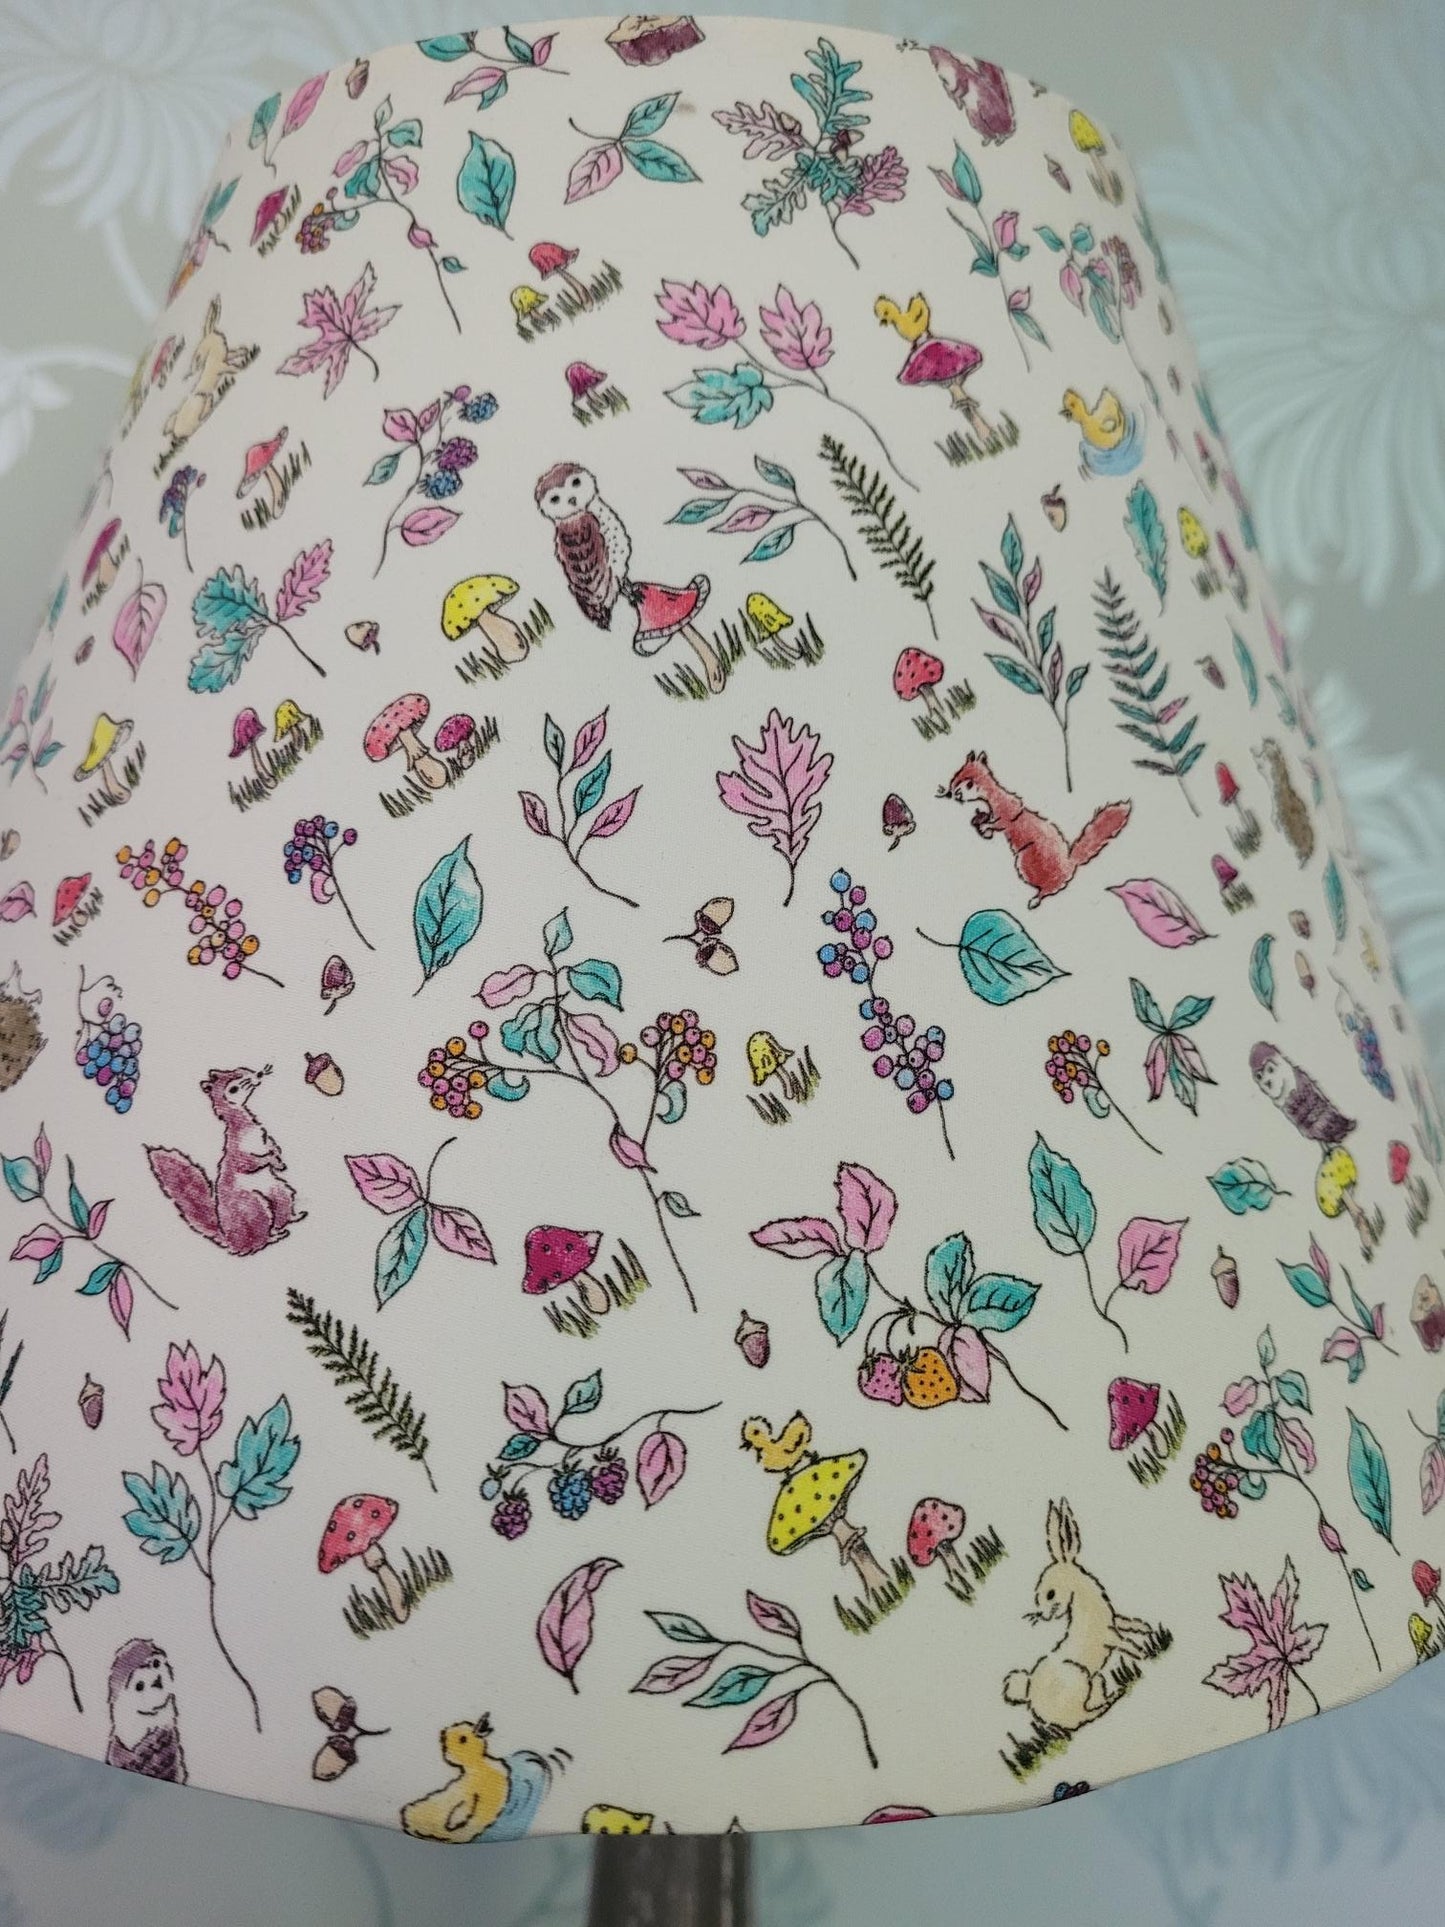 Liberty of London 25cm Coolie Lampshade, Woodland, Forest Creatures, Whimsical Lands, Children's Room, Baby Nursery